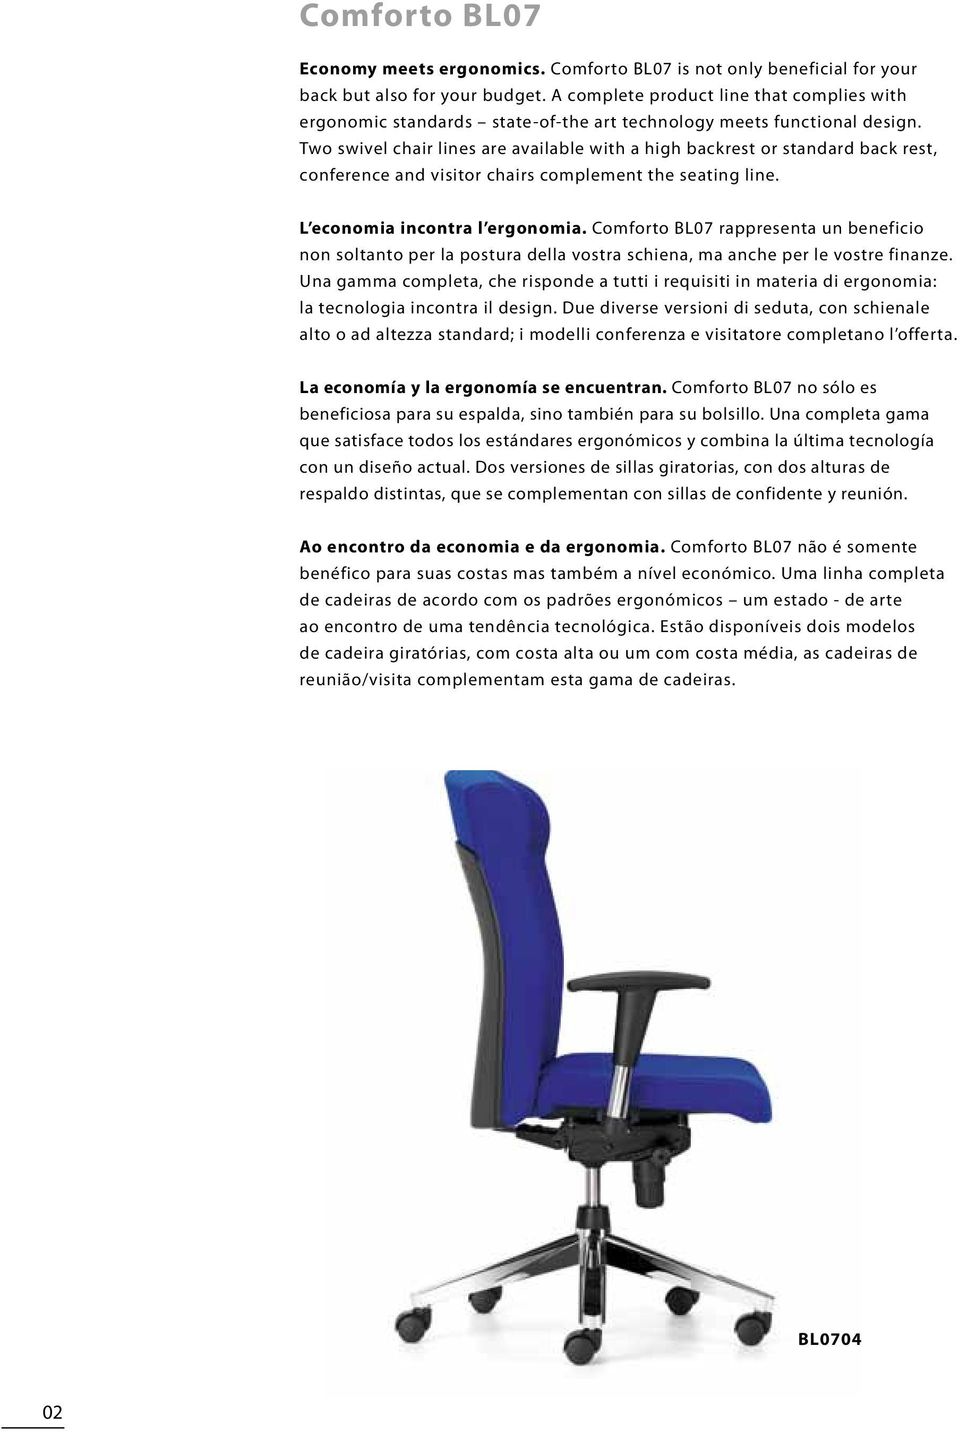 Two swivel chair lines are available with a high backrest or standard back rest, conference and visitor chairs complement the seating line. L economia incontra l ergonomia.